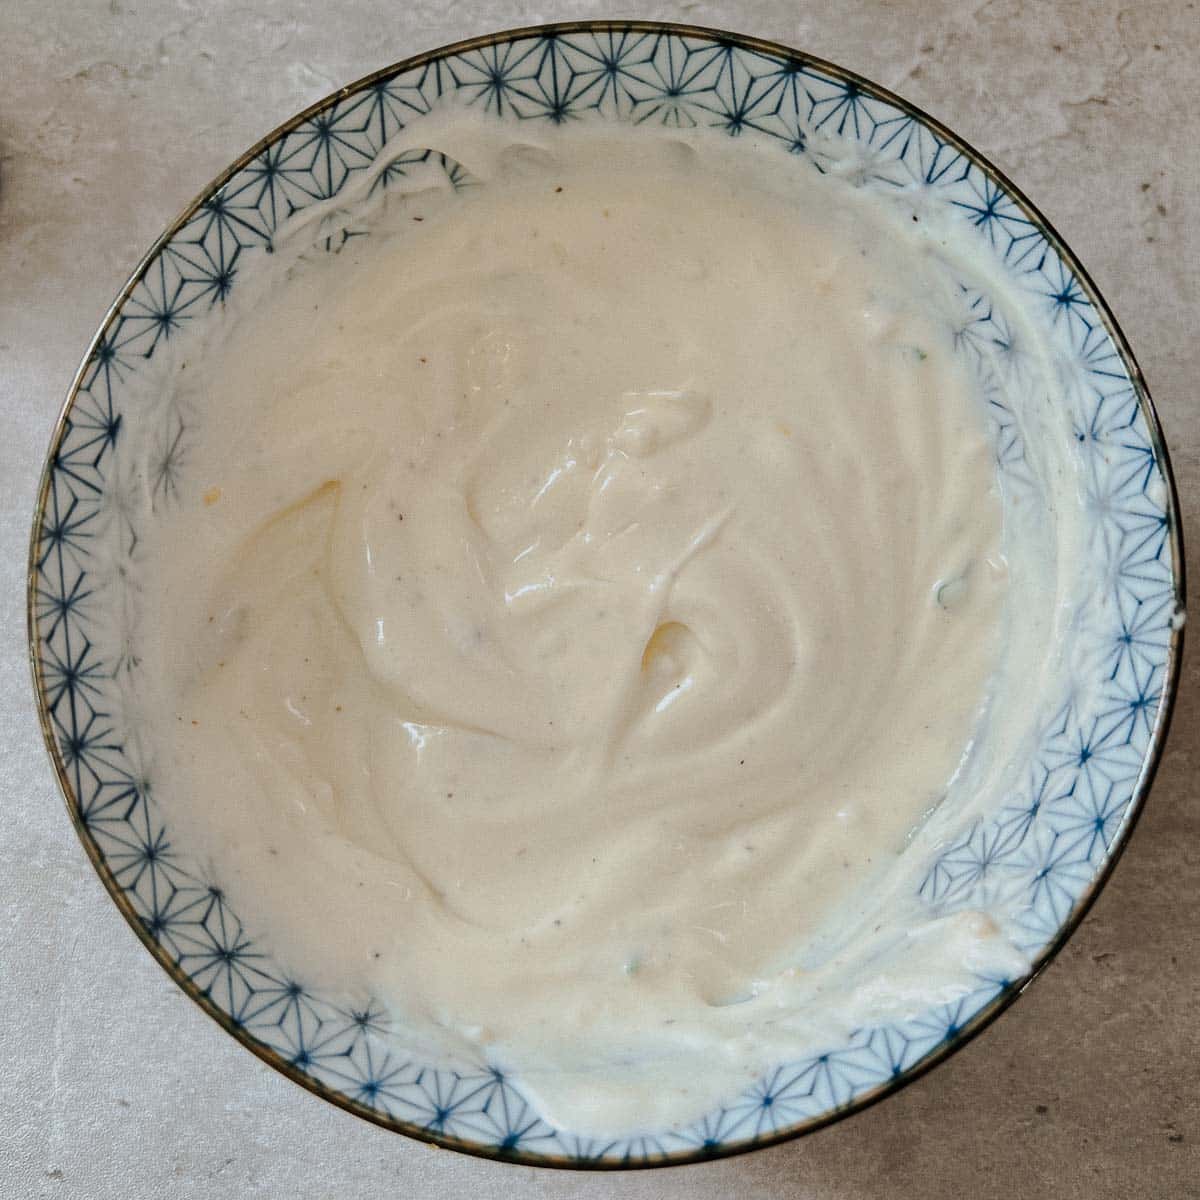 aioli after being mixed